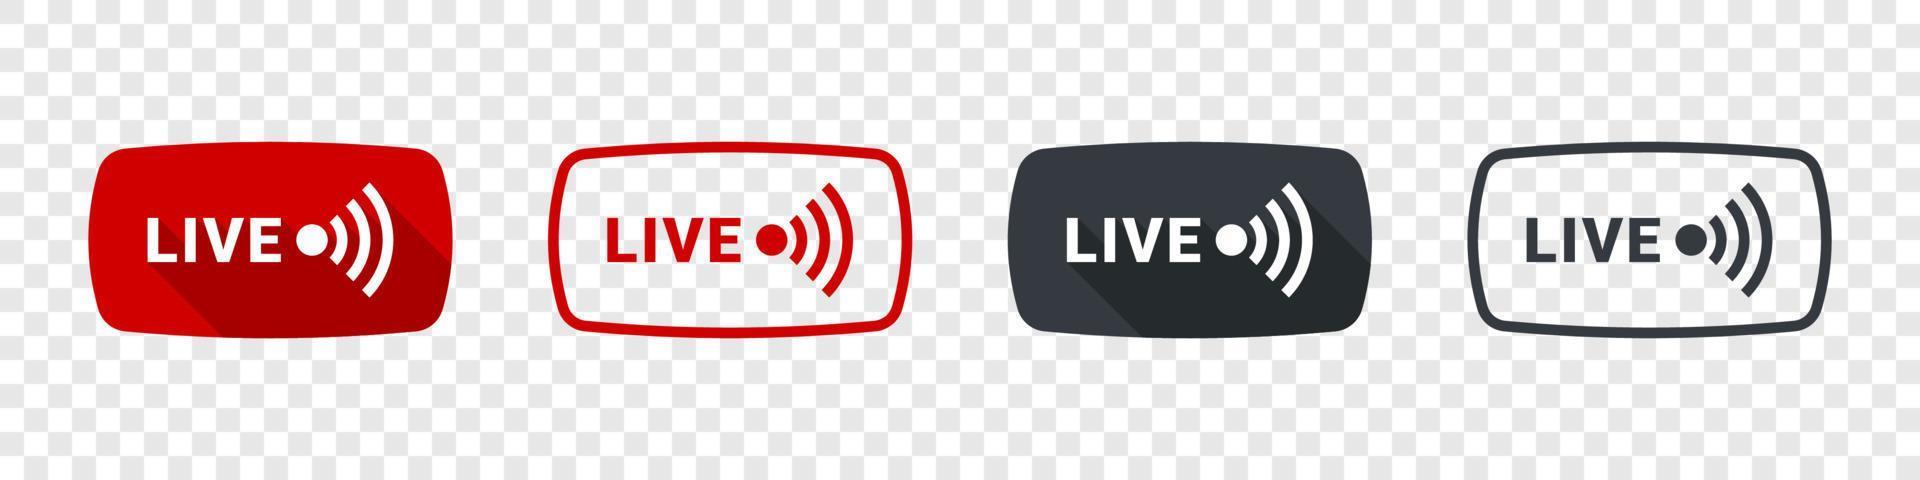 Live streaming icons. Live broadcasting symbols concept. Online stream icons. Social media. Vector illustration